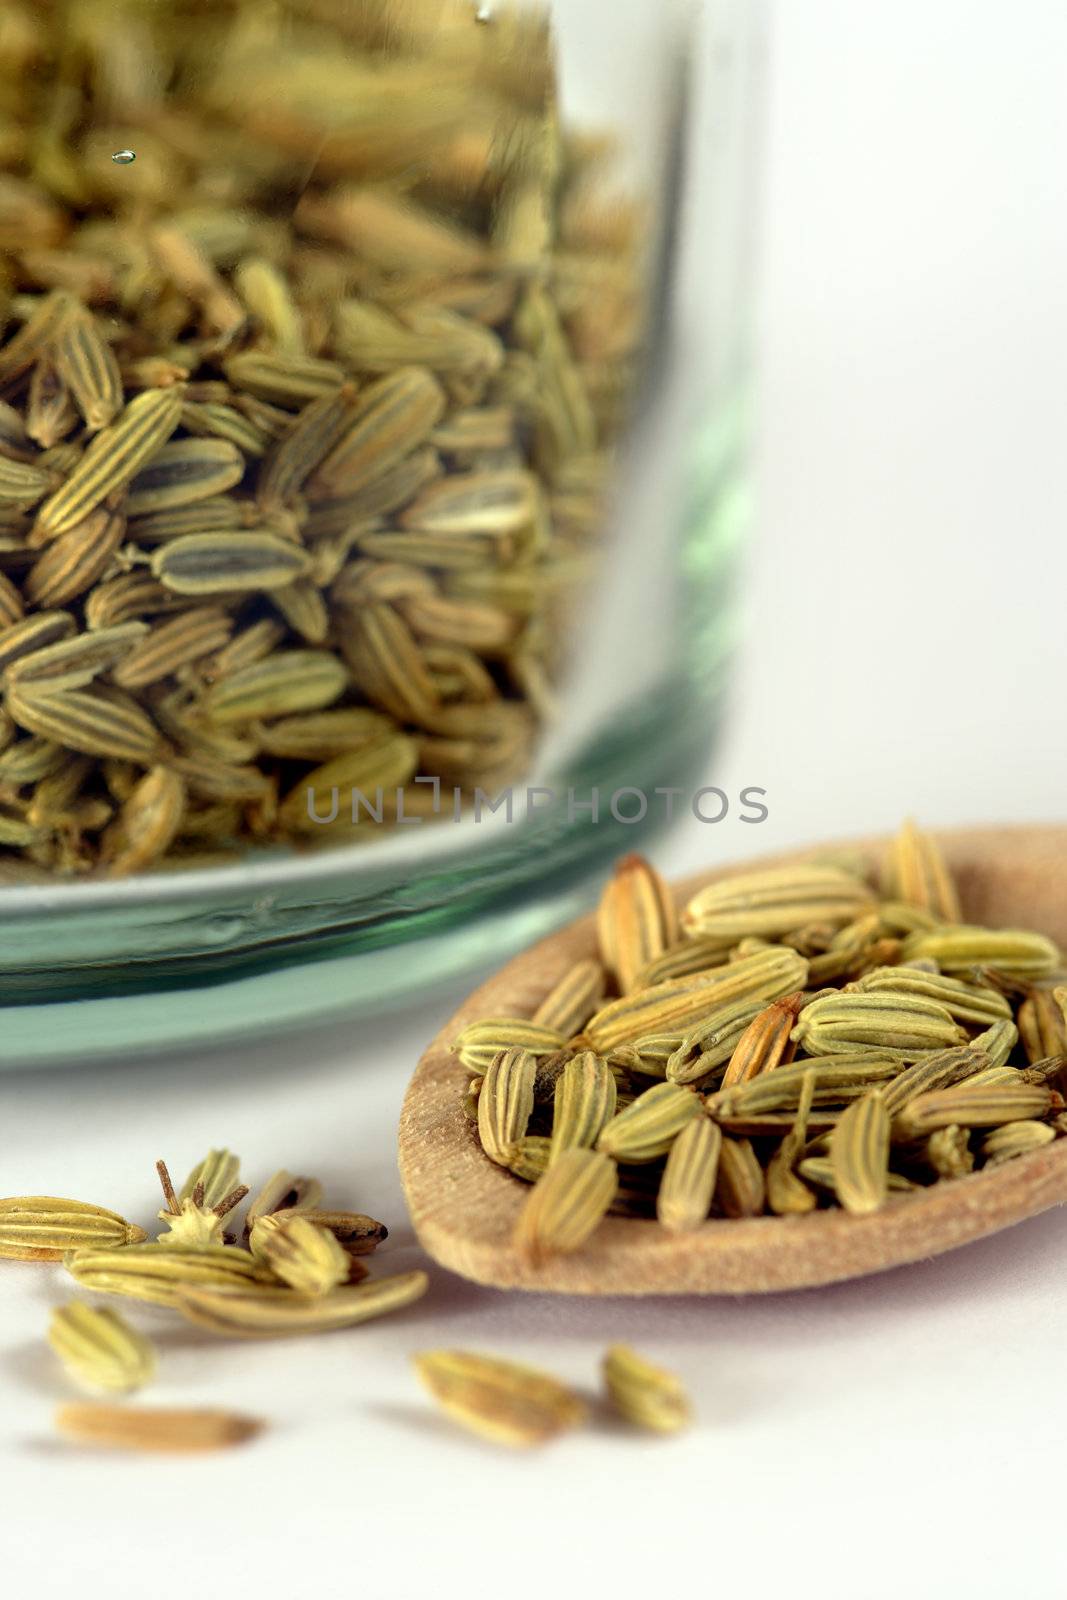 Fennel seeds by sumners